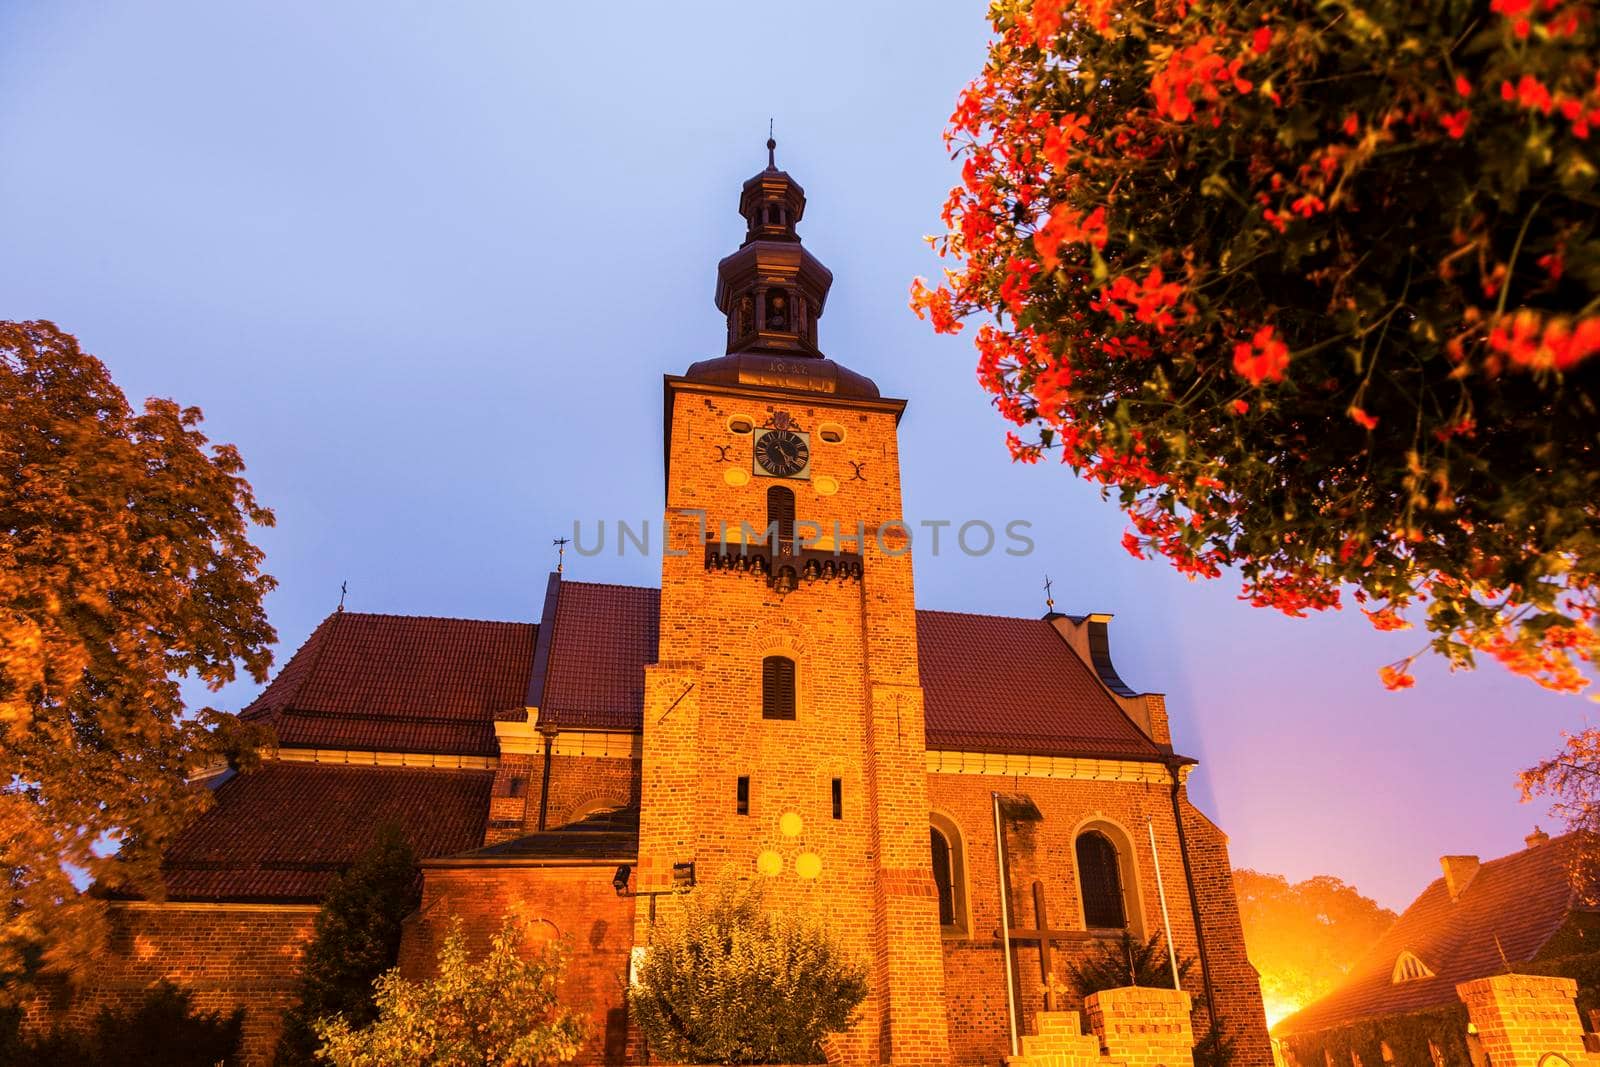 Farny Church in Gniezno by benkrut